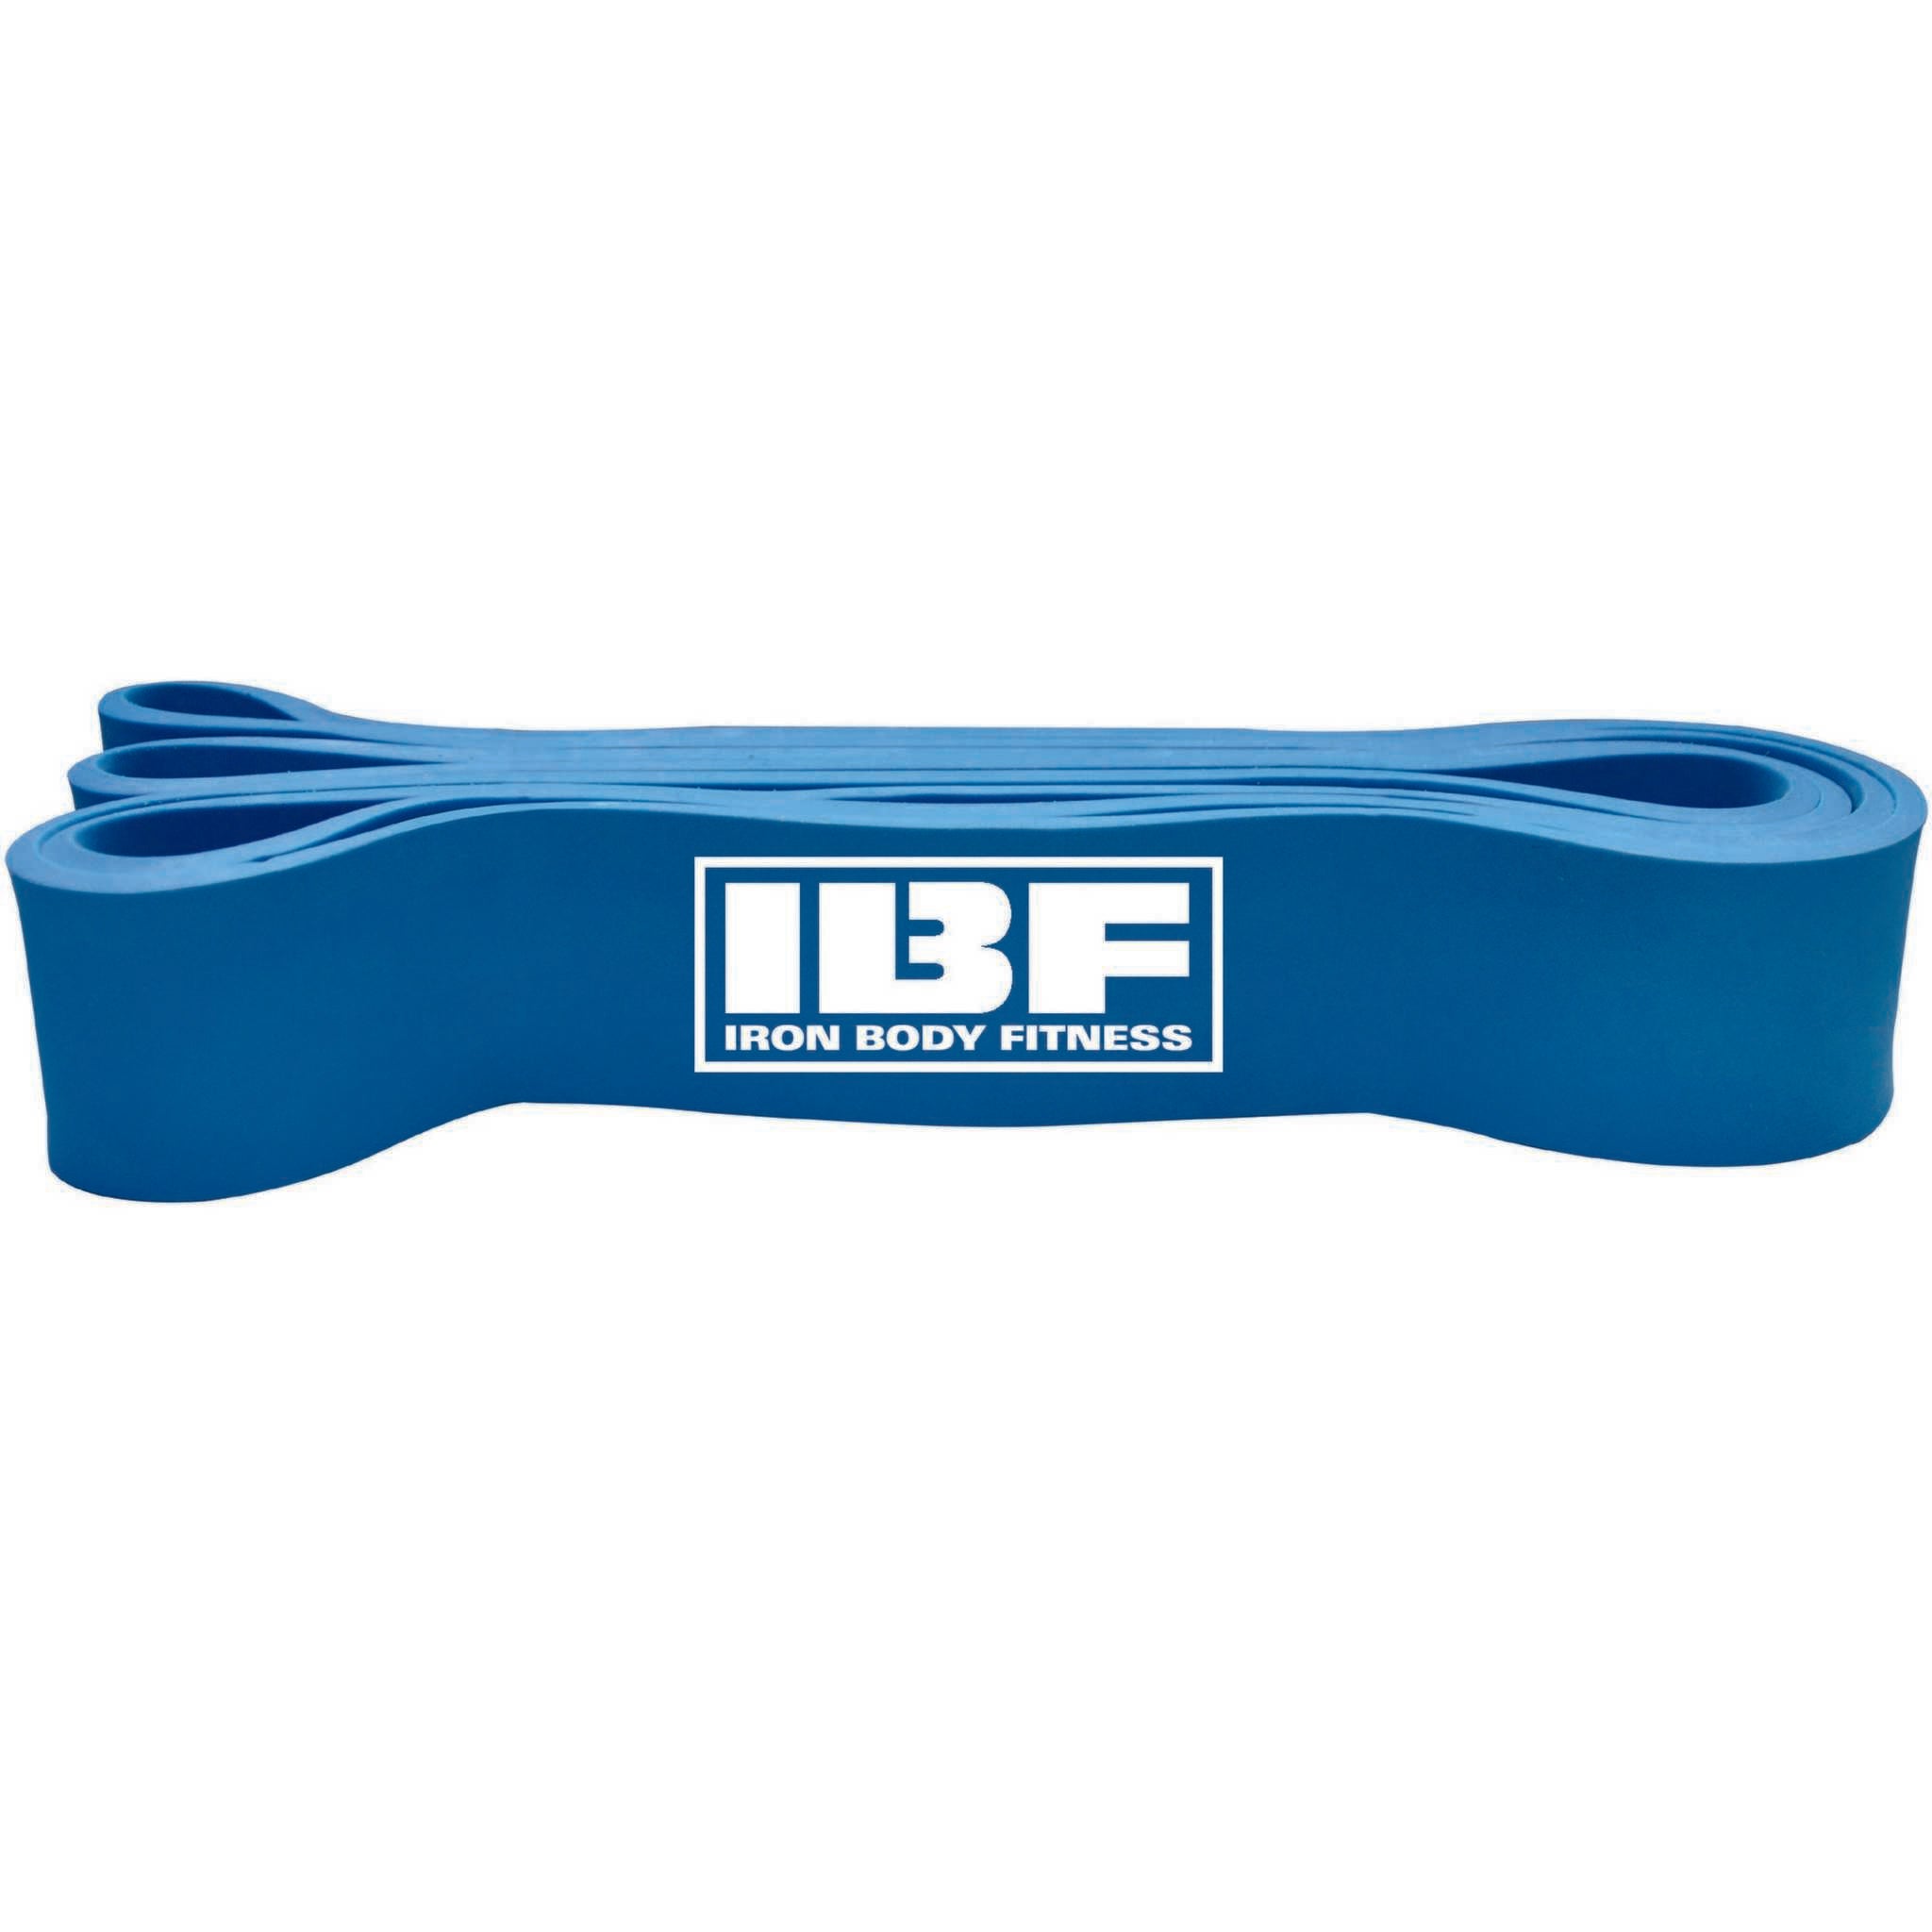 IBF Power Bands, Available in Light, Medium, Heavy & X-Heavy Resistance